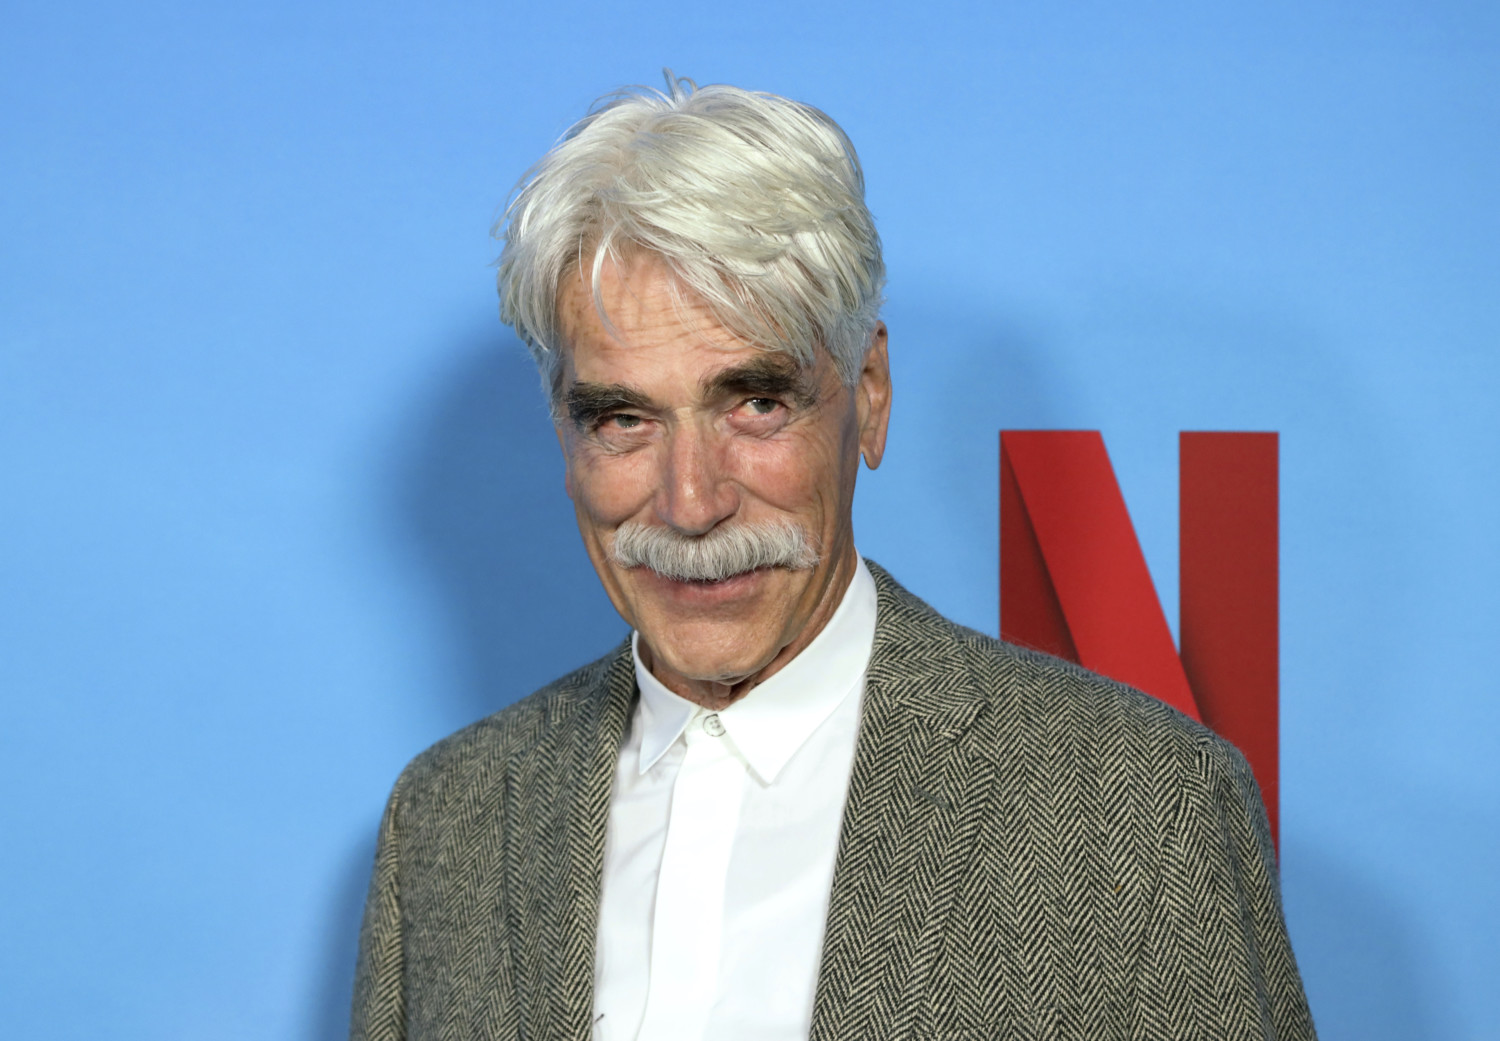 Sam Elliott attends the LA Special Screening of "All The Bright Places" at the ArcLight Cinemas Hollywood on Monday, Feb. 24, 2020, in Los Angeles. (Photo by Willy Sanjuan/Invision/AP)